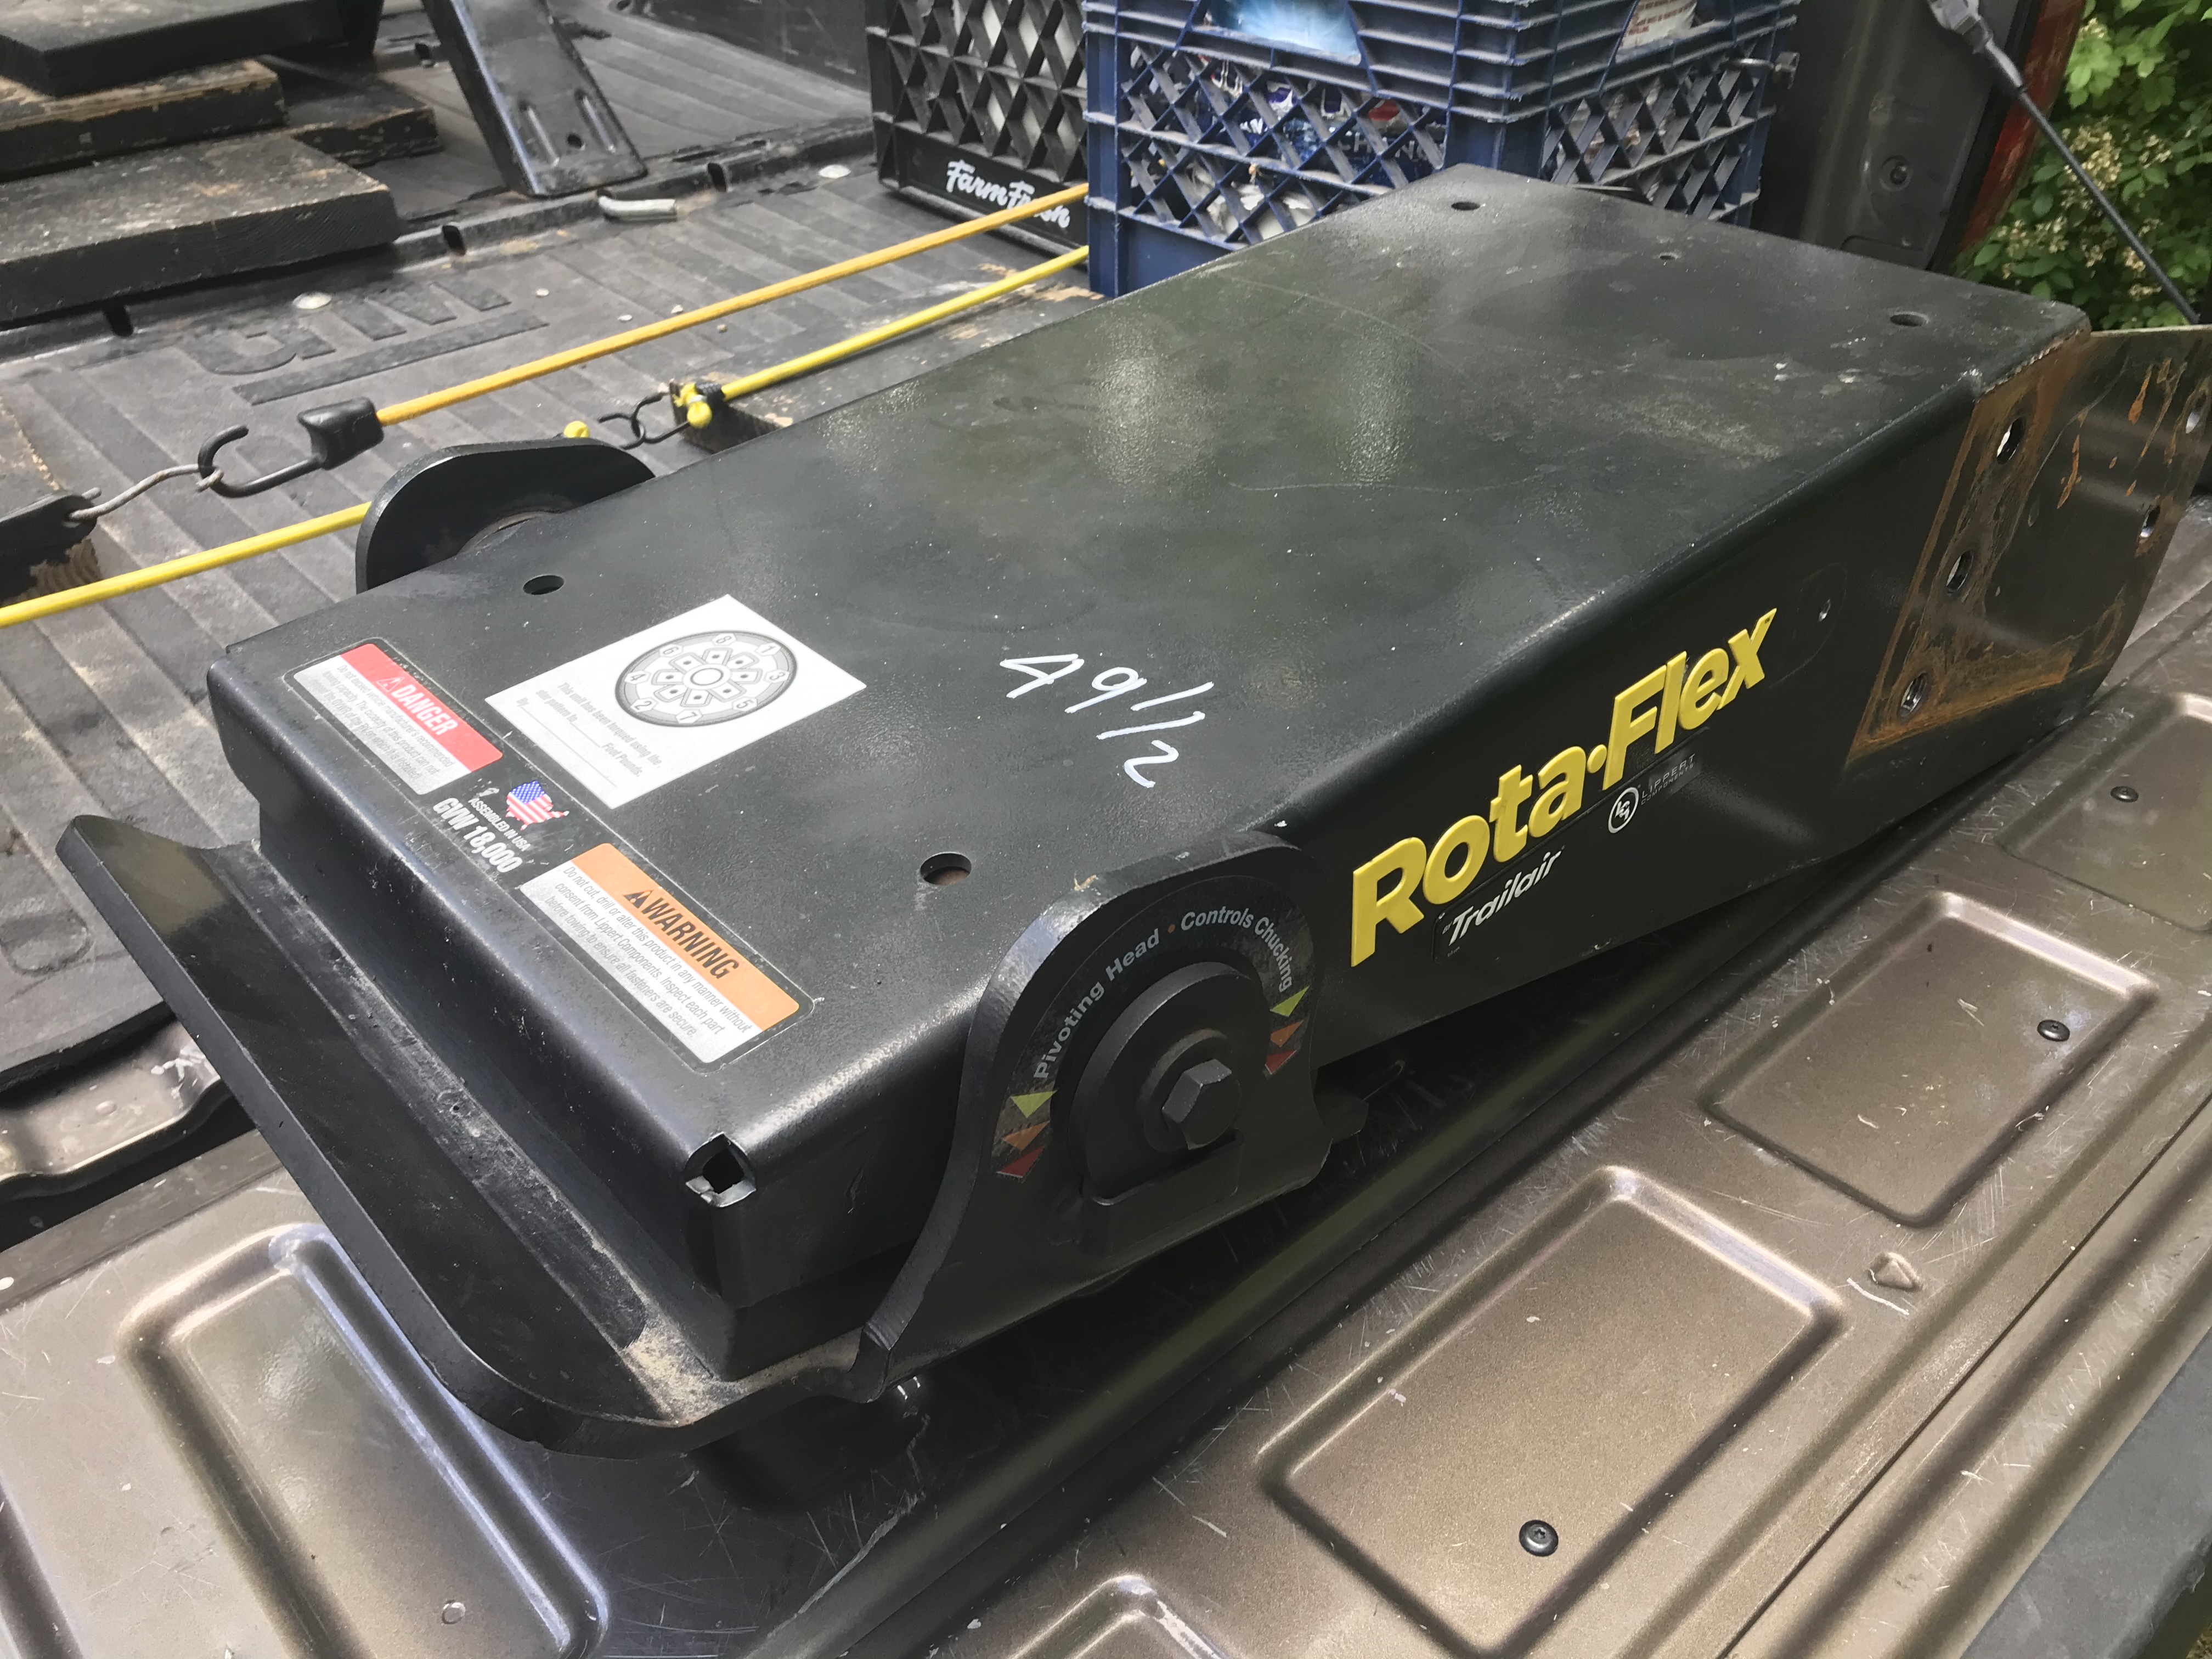 Rota-flex pin box for sale, used 2 years old $200 | GDRV4Life - Your Connection to the Grand Rota-flex Pin Box Be Used For Gooseneck